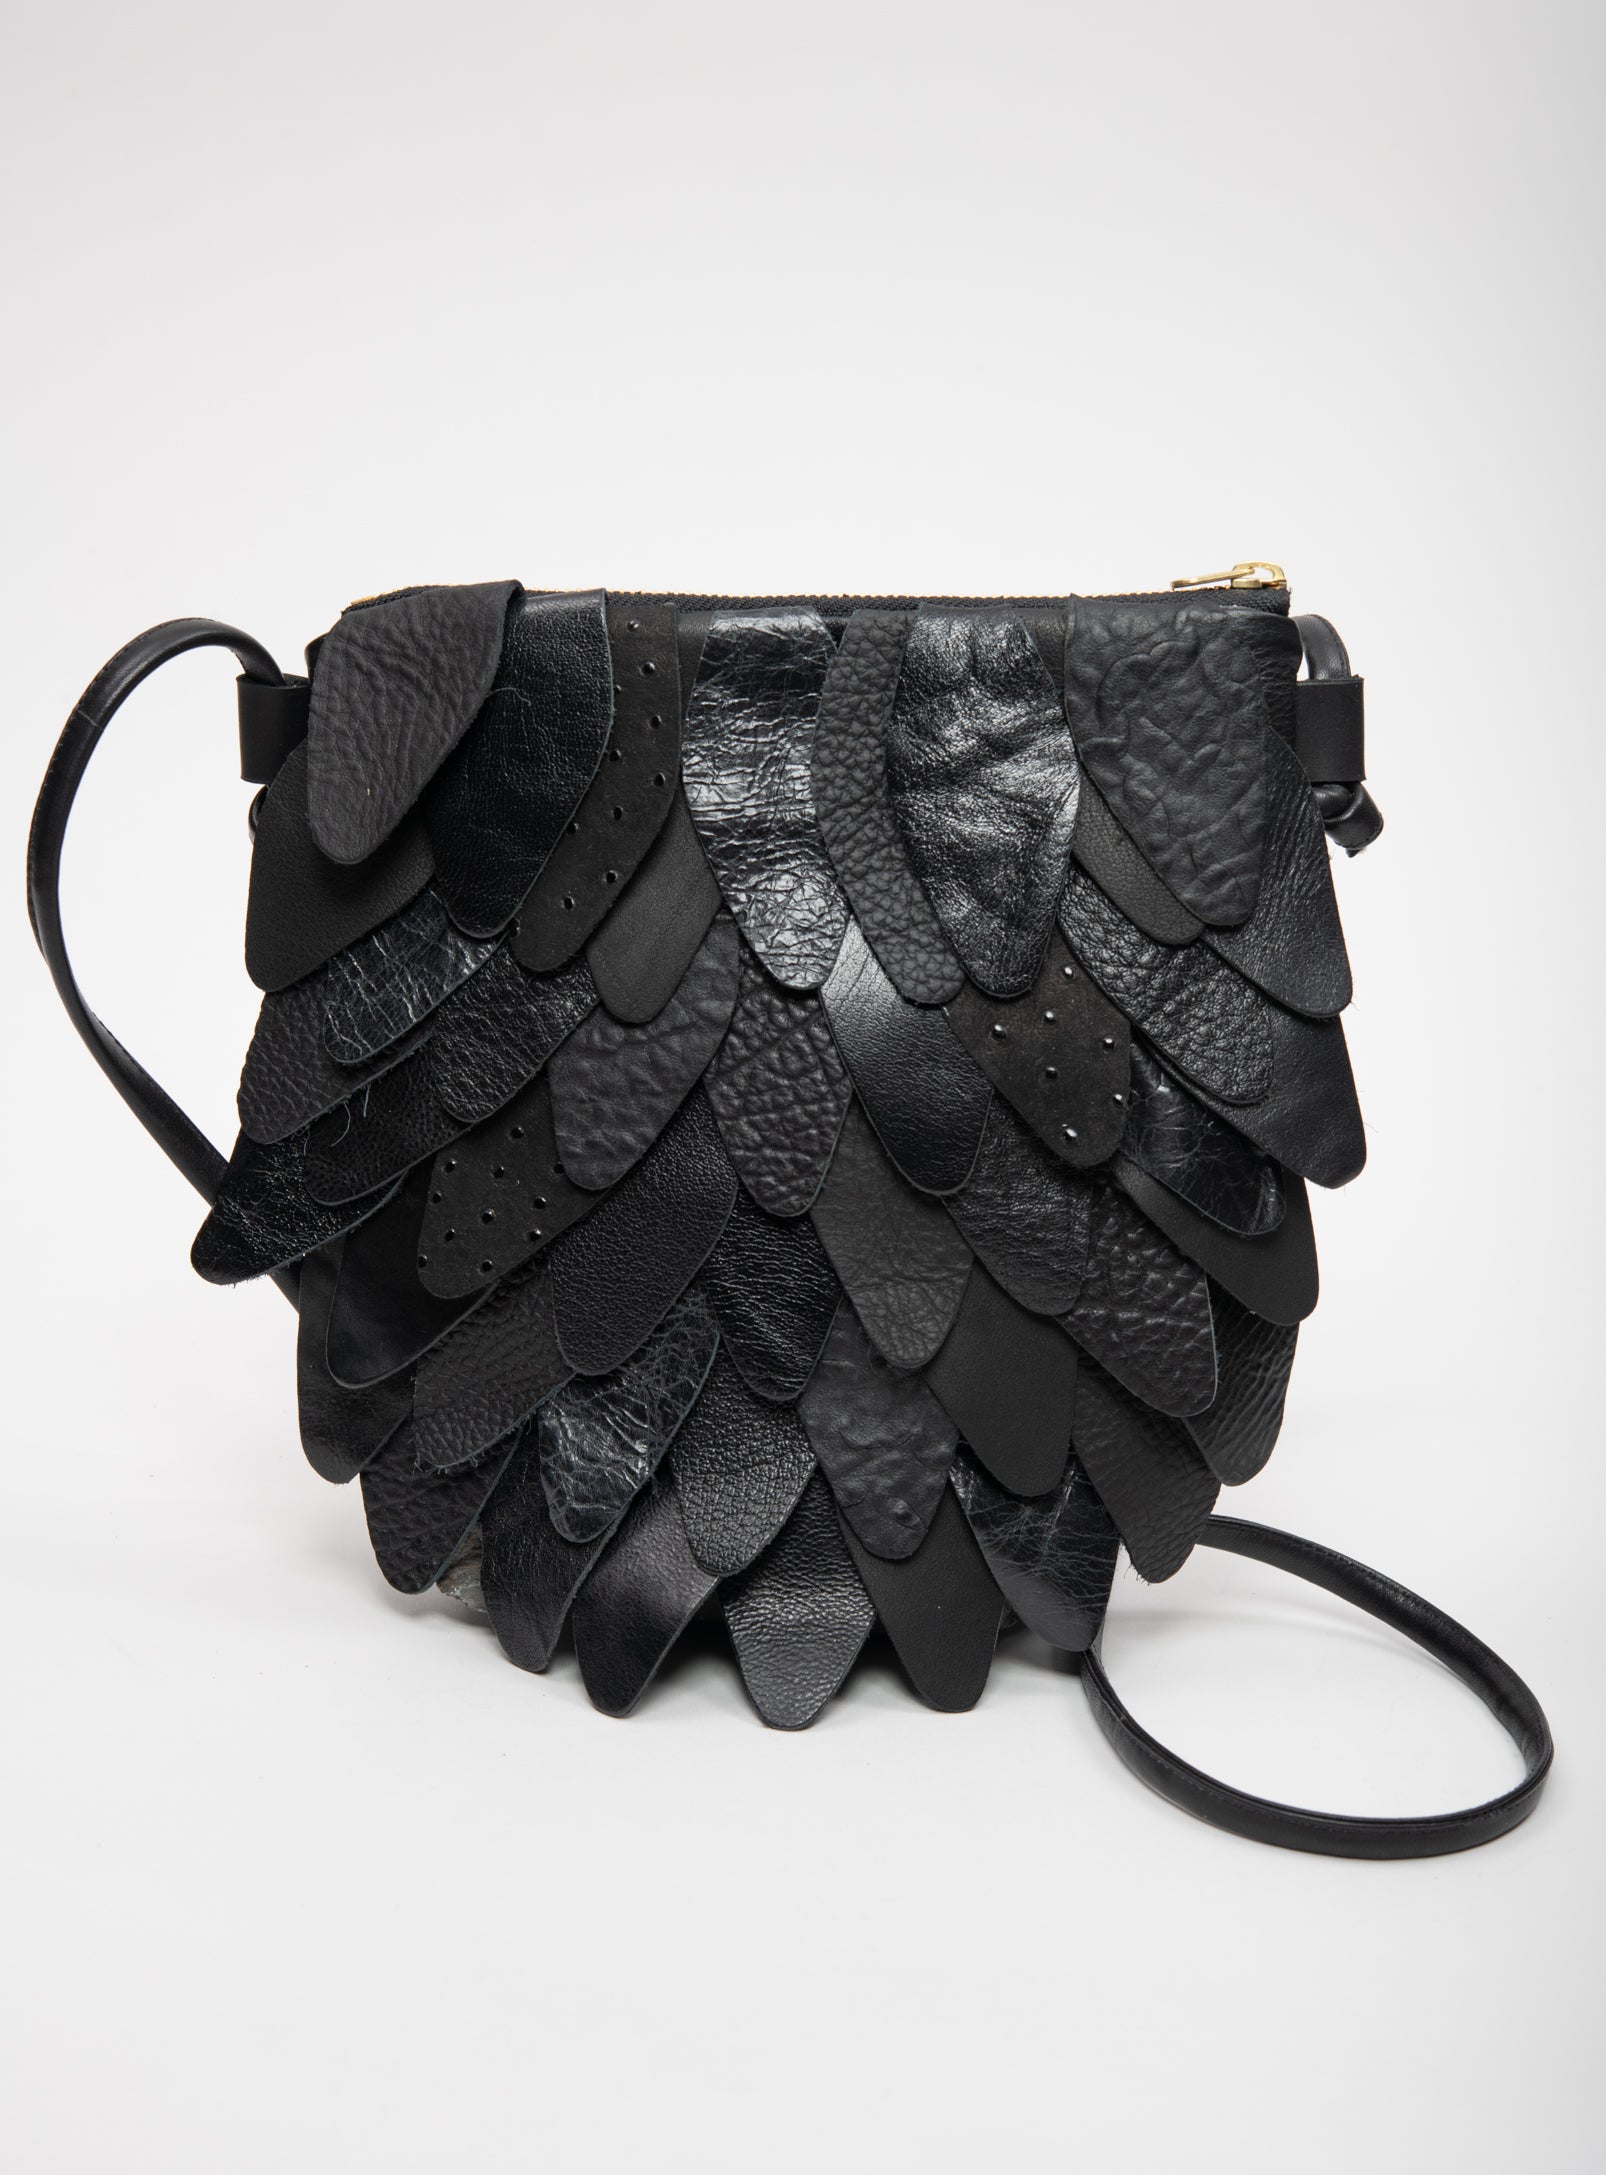 Veinage Wide multi-fringed leather pouch with shoulder strap PALOMA model, handmade in Montreal Canada